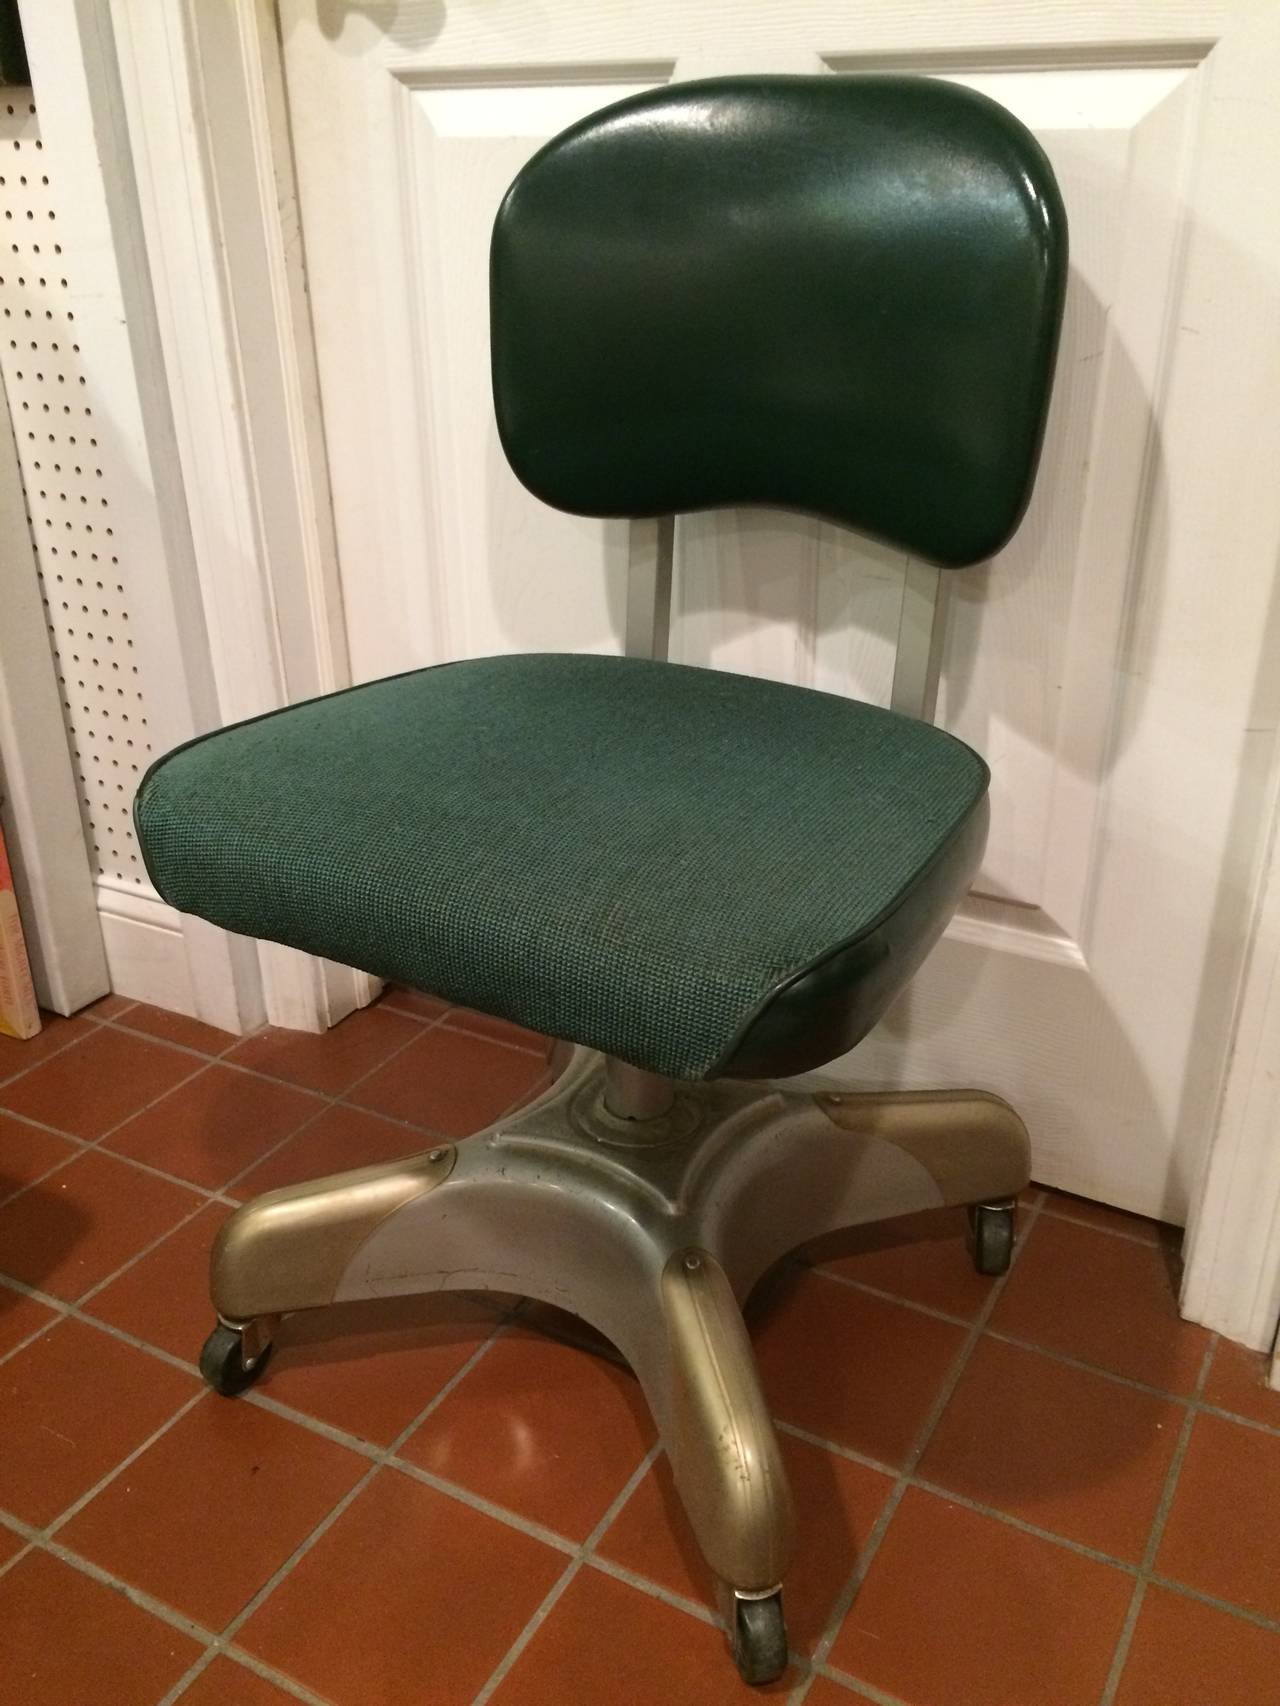 Industrial Office Task Swivel Chair. Heavy and Solid this tank chair epitomizes the 1950's industrial era. Its swivels and adjusts to be ergonomically correct for your body.